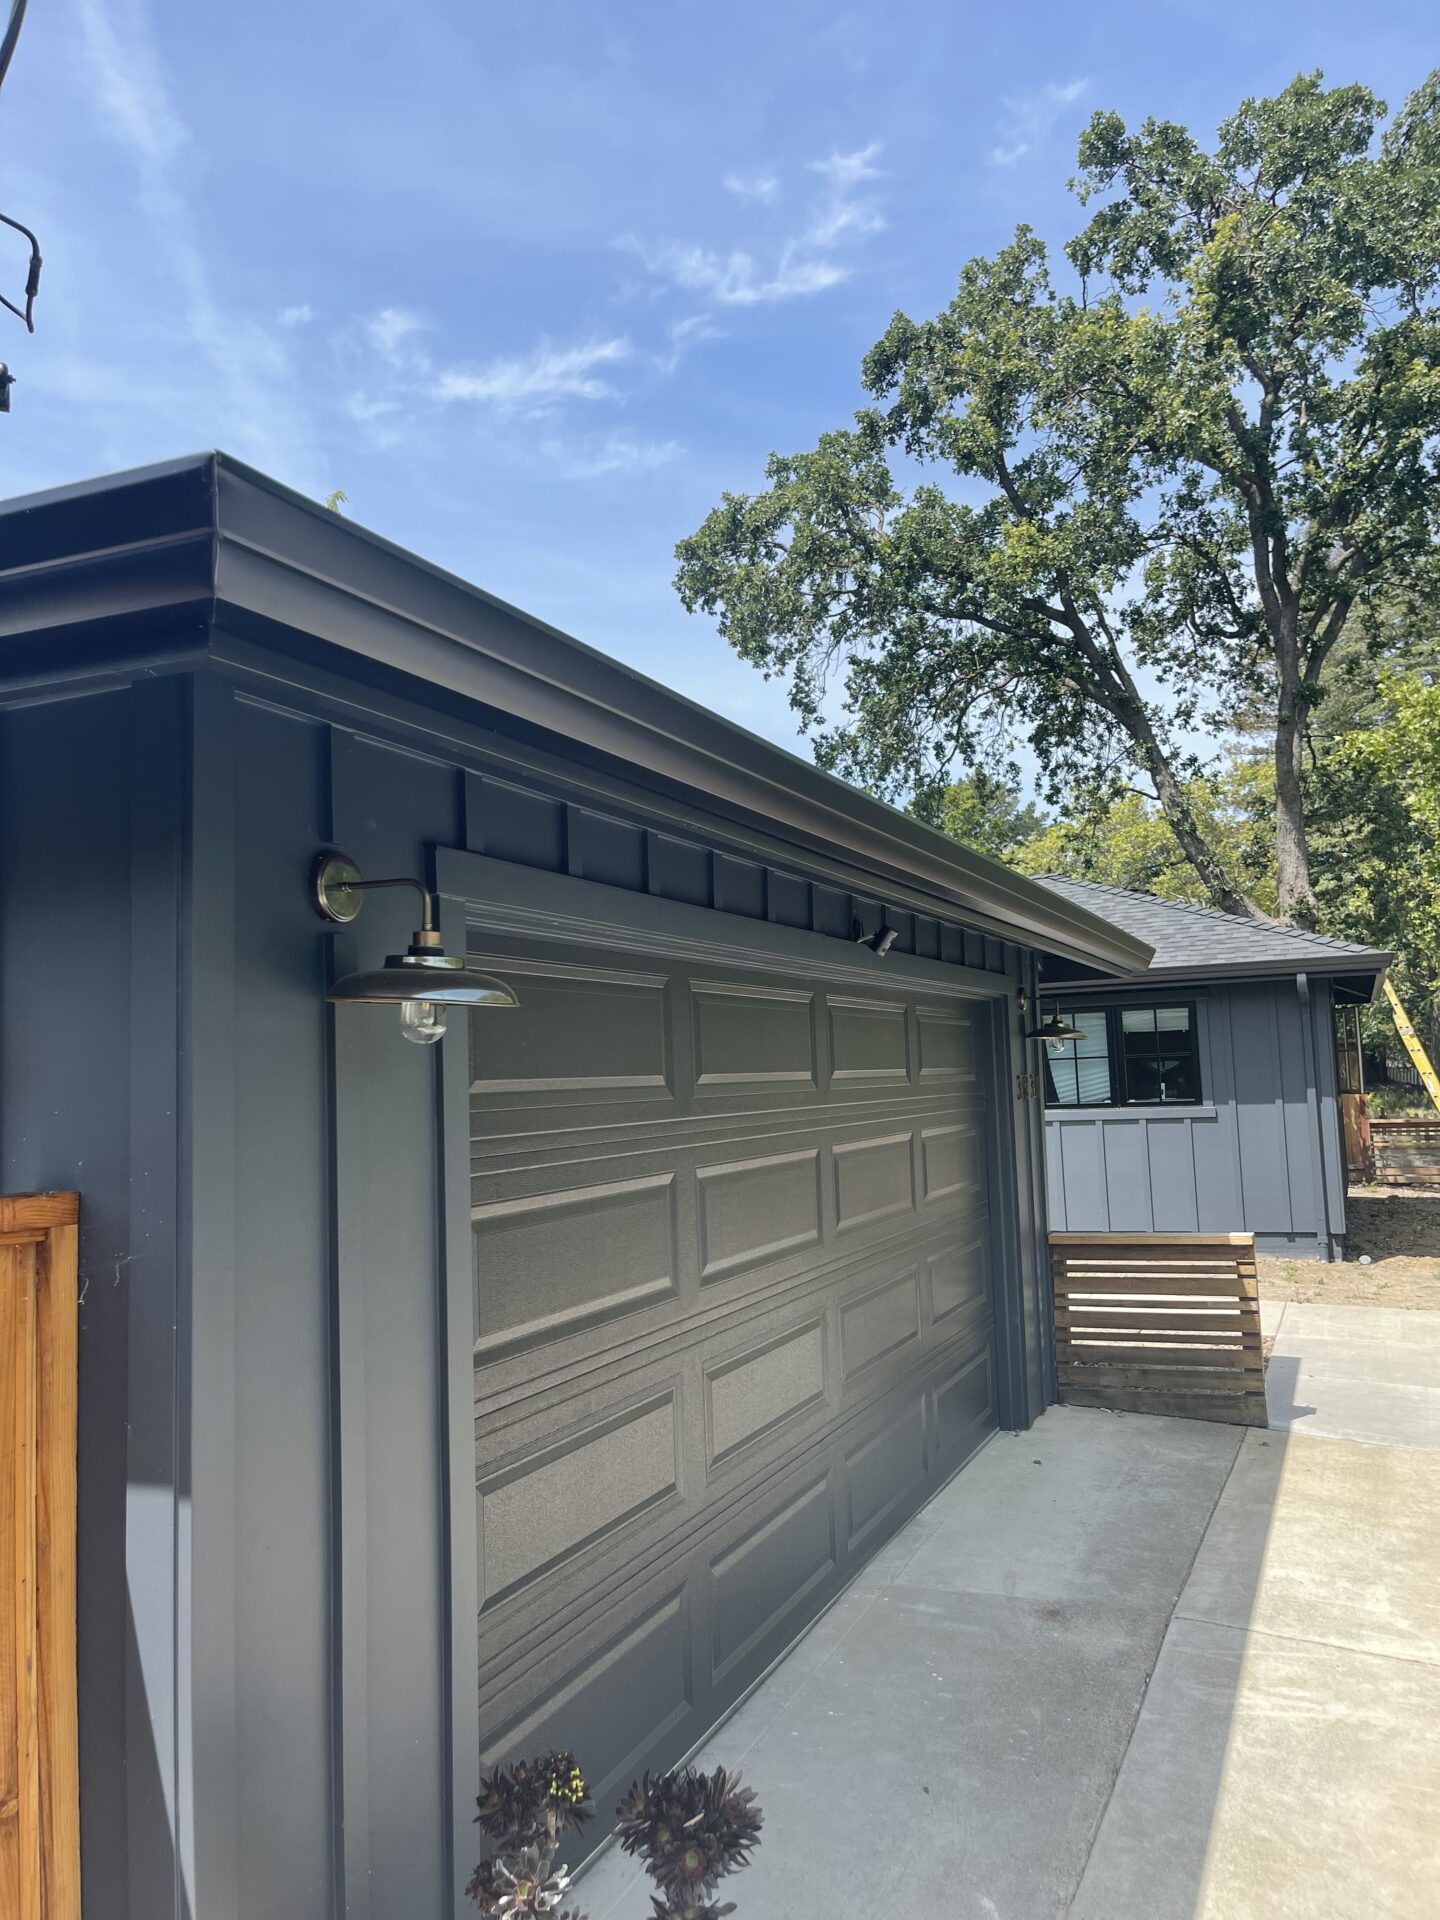 A newly painted garage